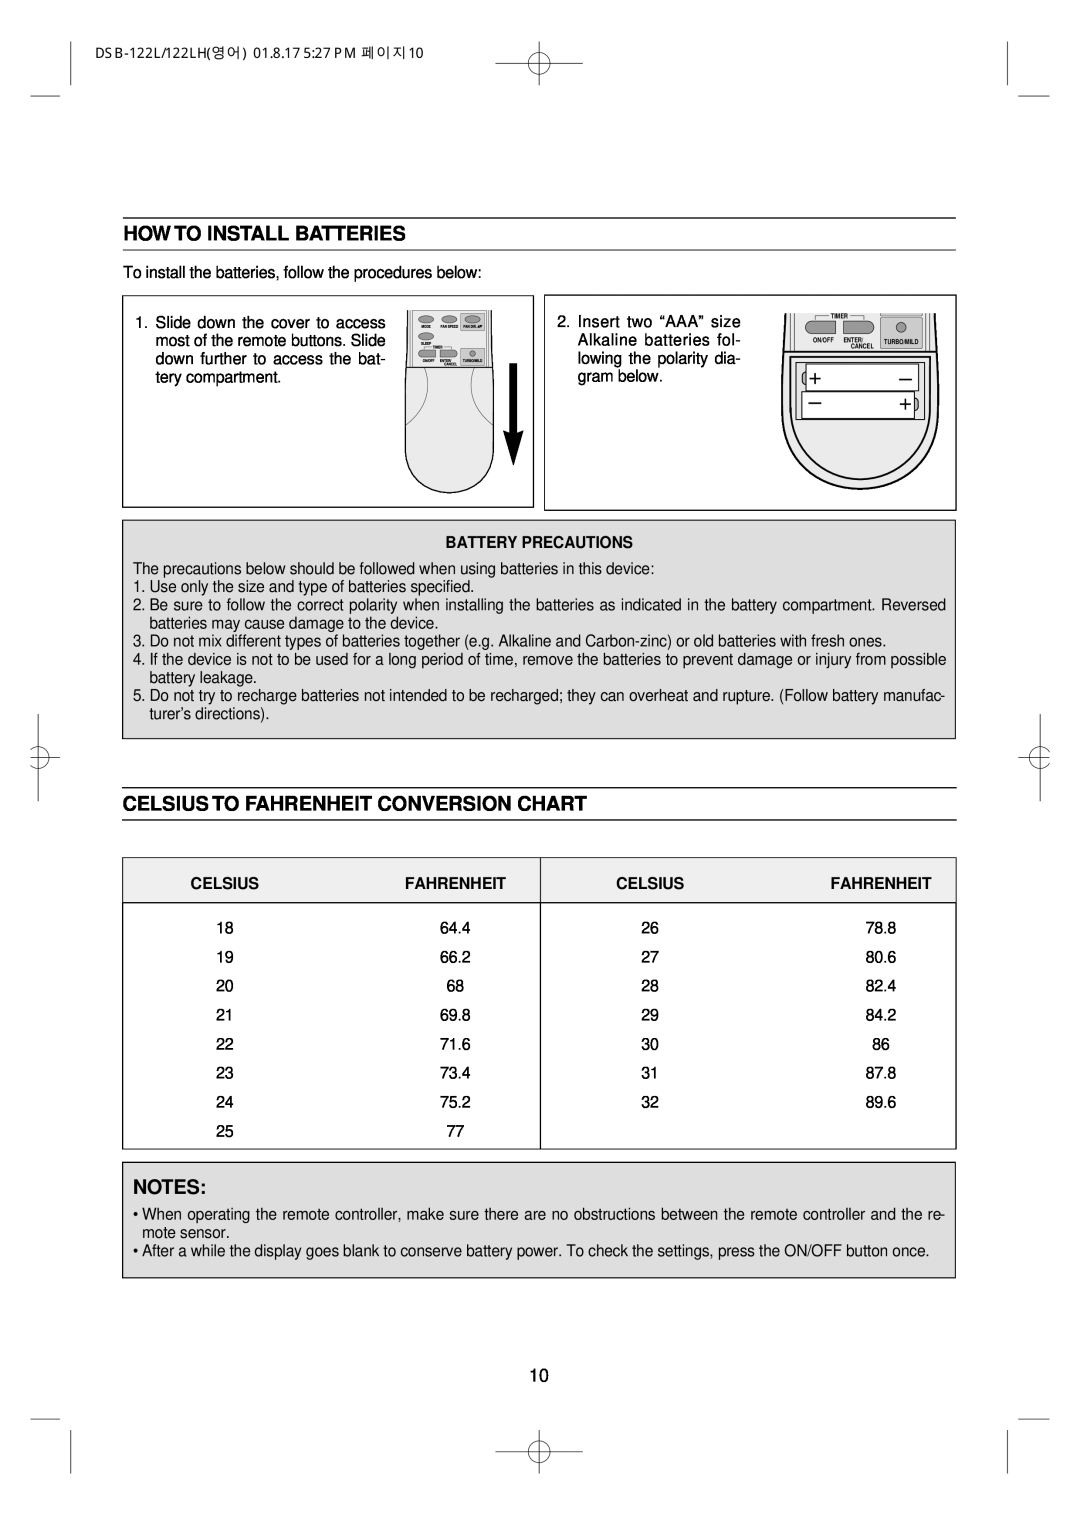 Daewoo DSB-122LH owner manual How To Install Batteries, Celsius To Fahrenheit Conversion Chart, Battery Precautions 